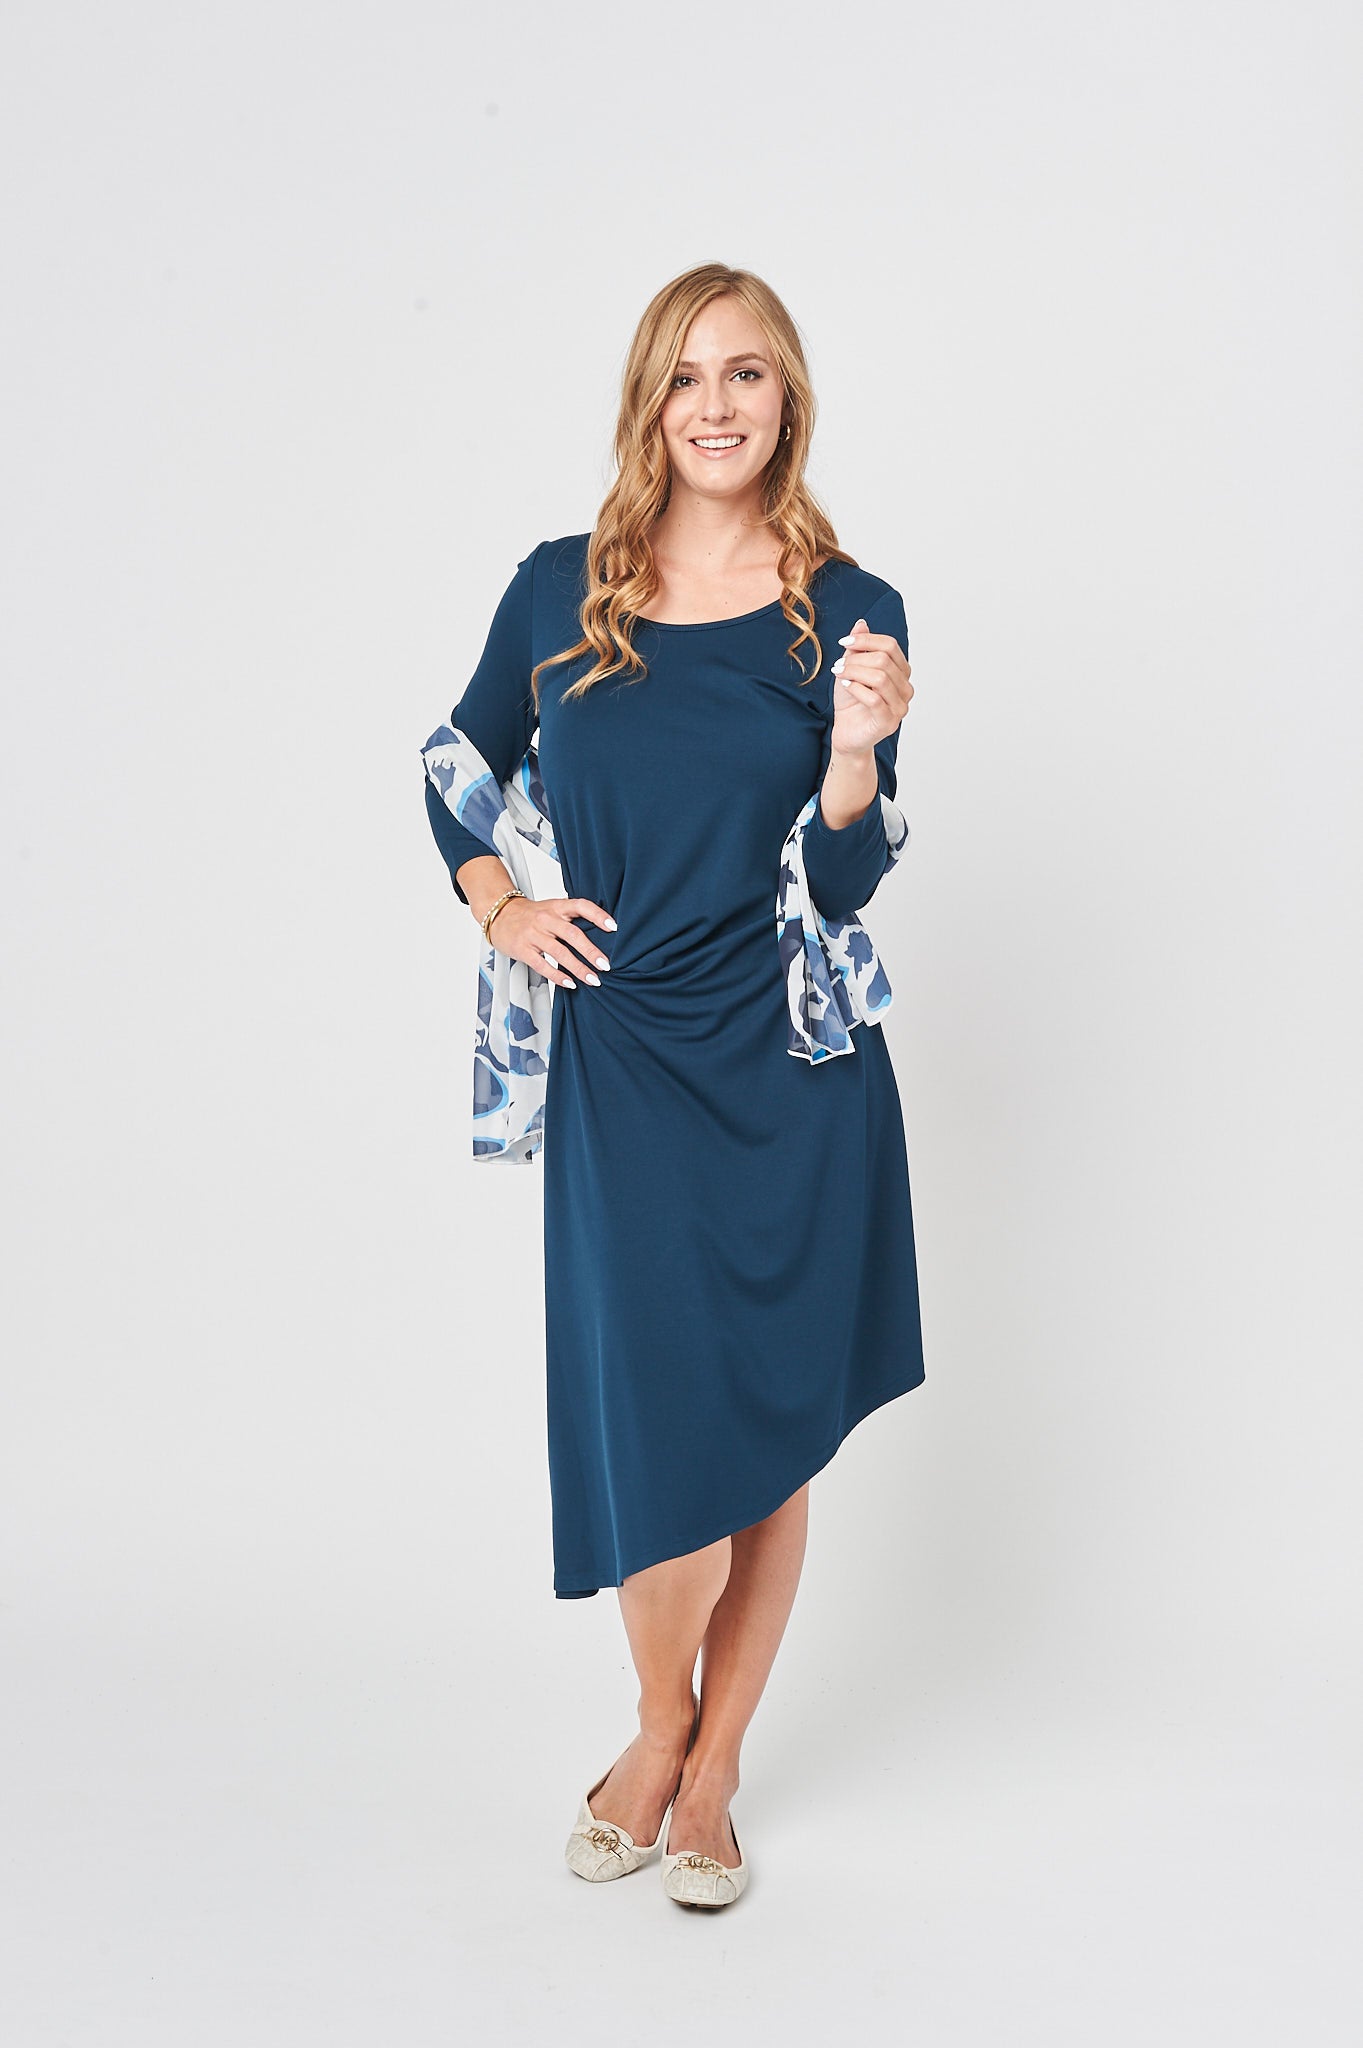 THE ALL DAY SATURDAY DRESS IN TURQUOISE BLUE